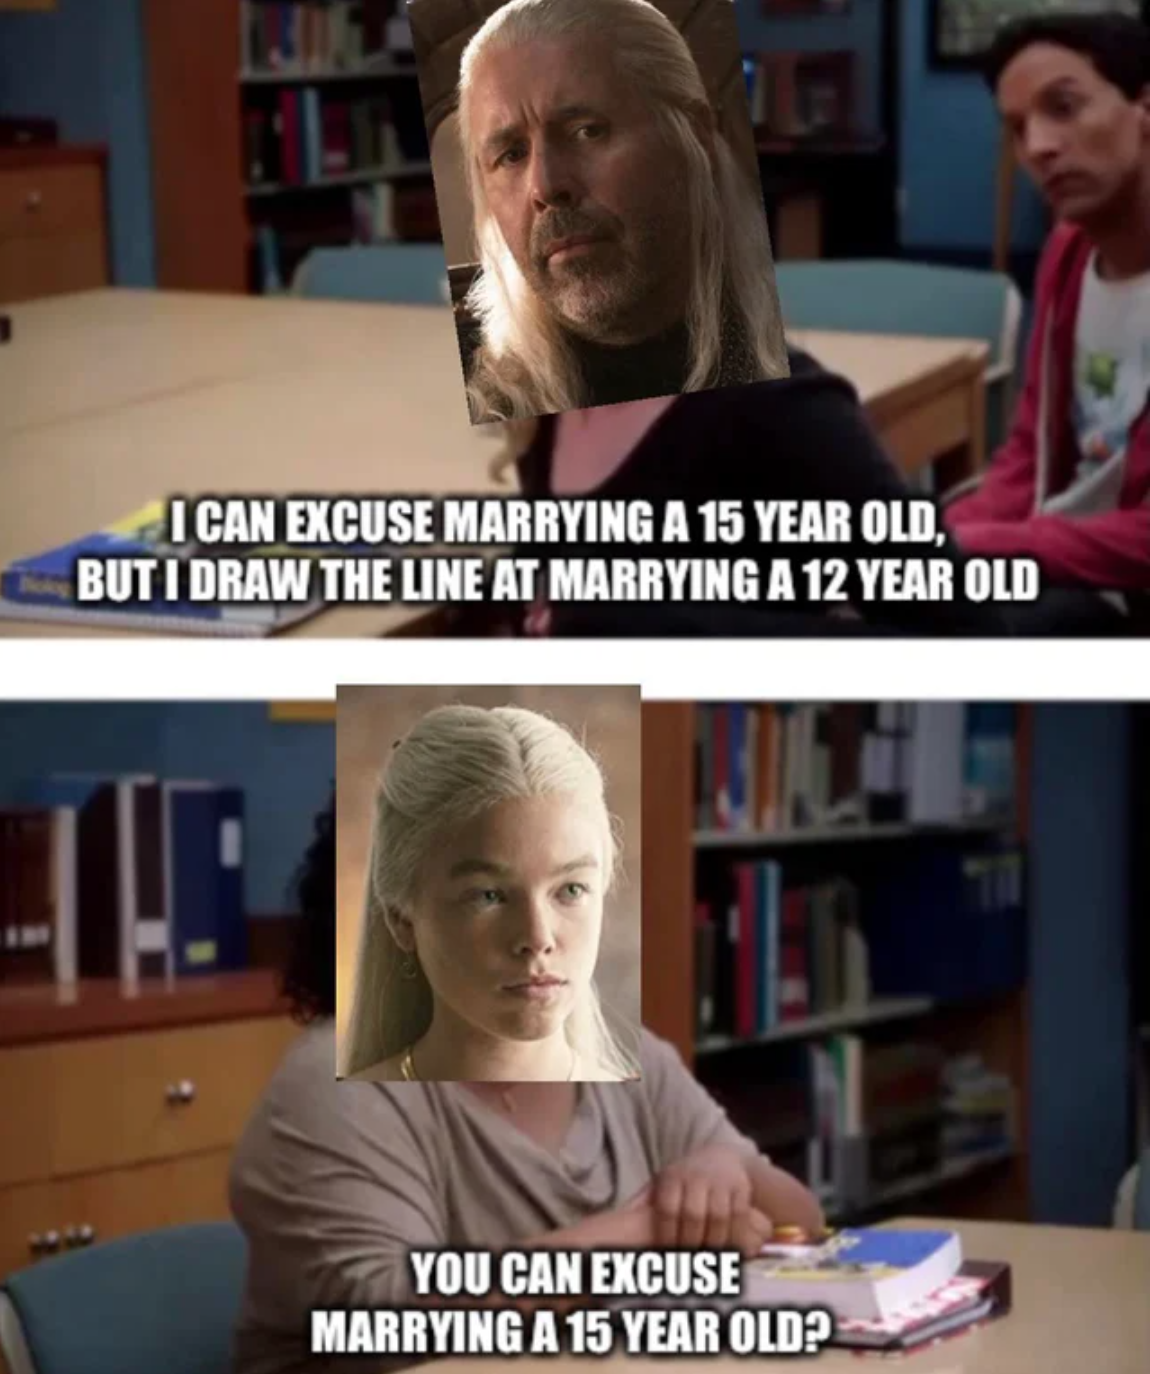 House of the Dragon Episode 2 memes - facial expression - I Can Excuse Marrying A 15 Year Old, But I Draw The Line At Marrying A 12 Year Old 40 You Can Excuse Marrying A 15 Year Old?